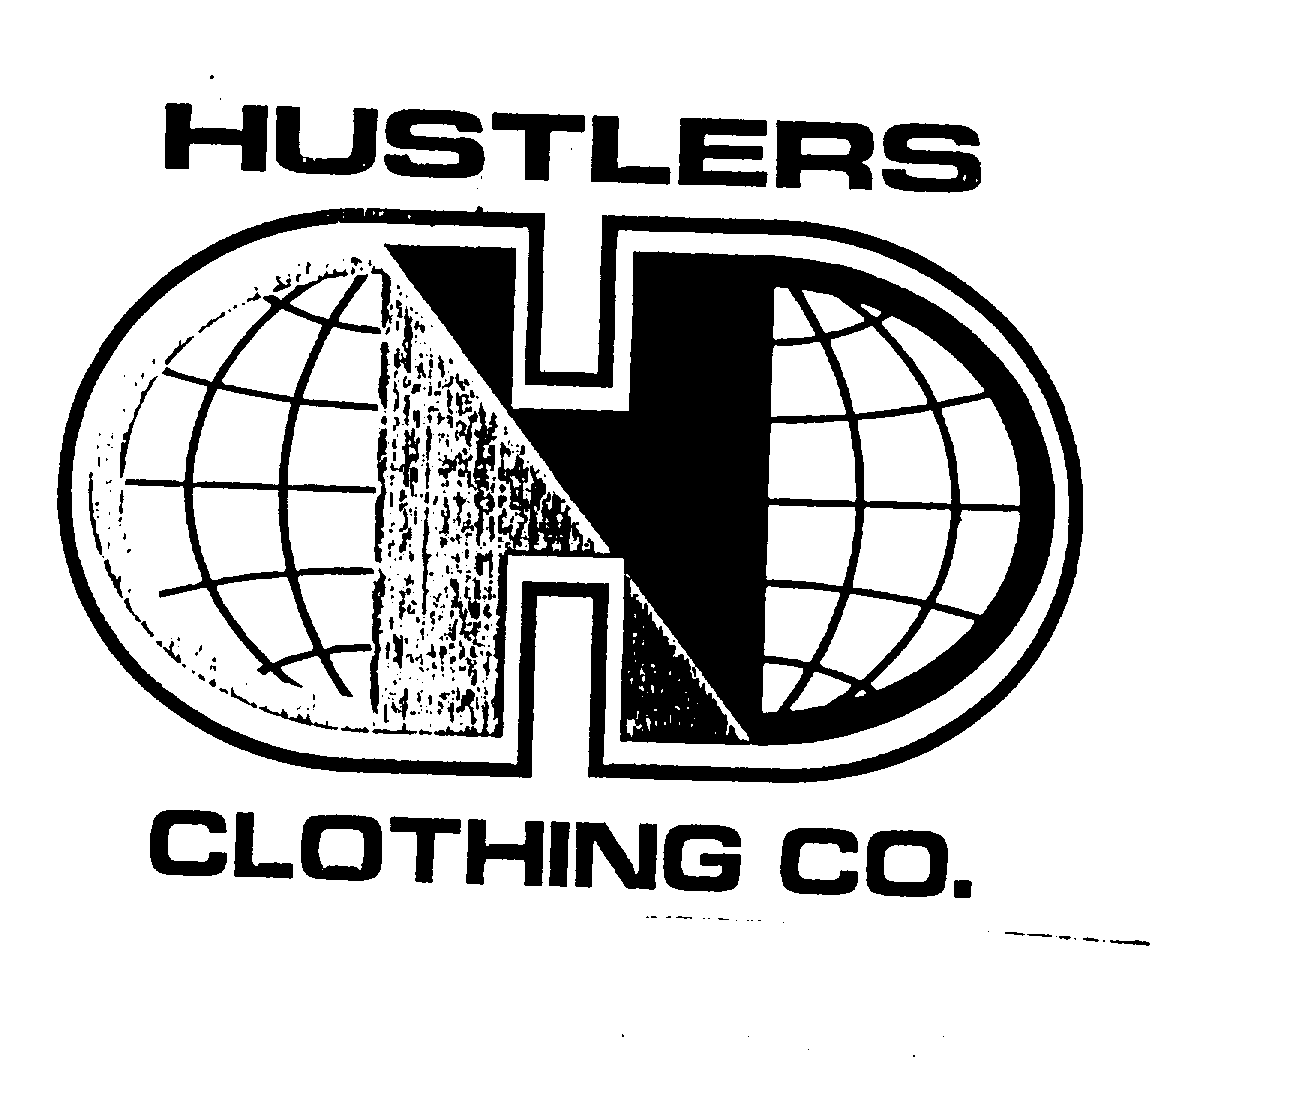  HUSTLERS CLOTHING CO.